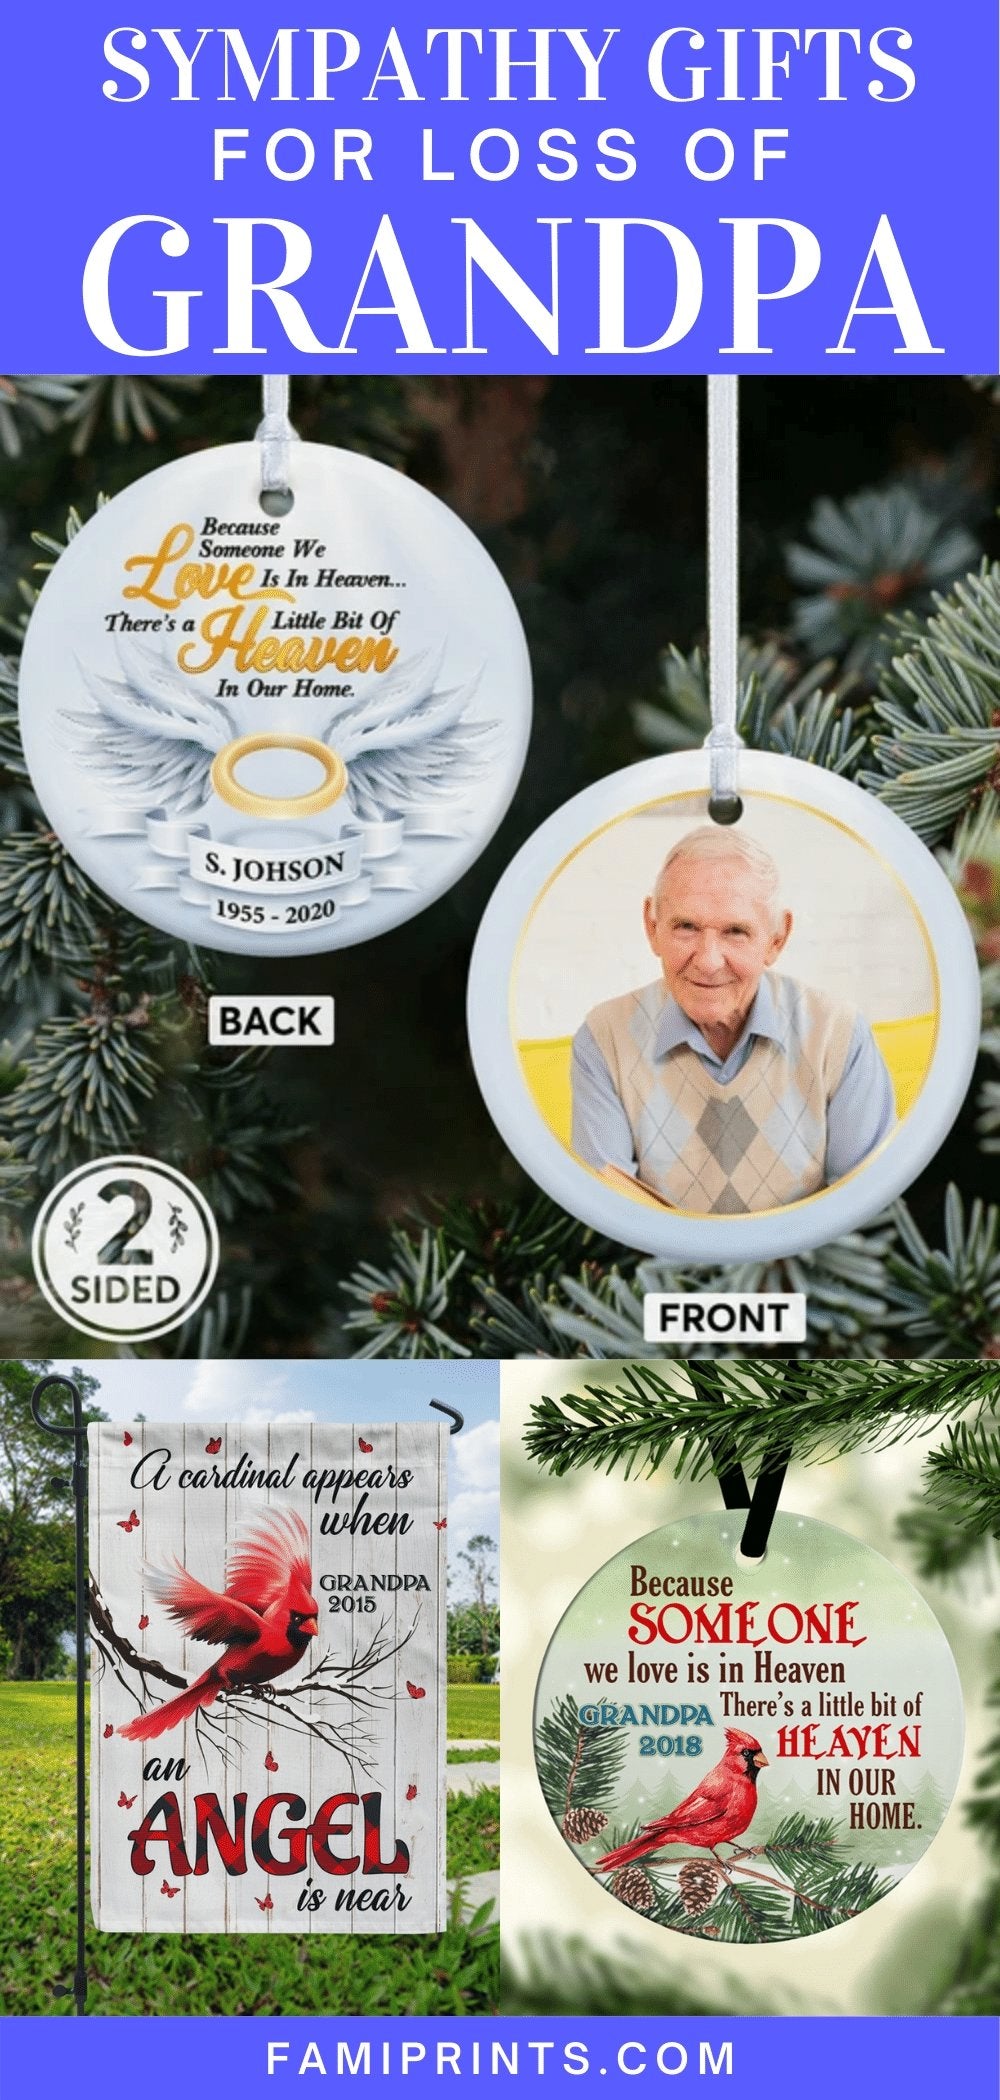 Sympathy Gift Ideas for Loss of Grandpa | FamiPrints | Trending Personalized Family Gifts